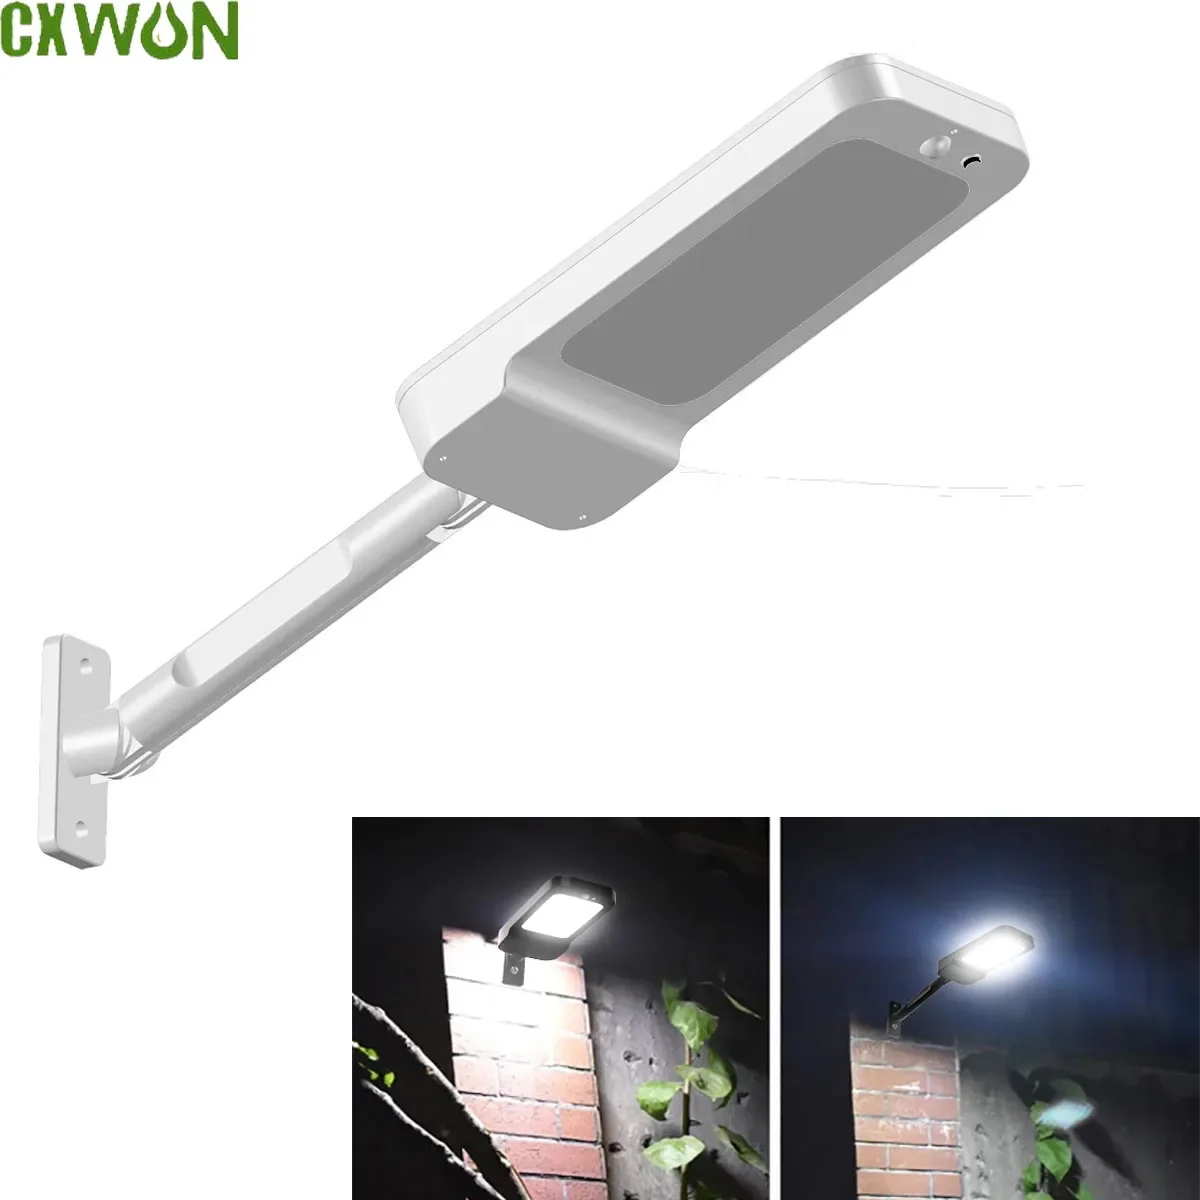 Outdoor Solar Lamp with Motion Detector LED Solar Powered Wall Lights 4 Modes Lighting Security Flood Light for Garden Fence outdoor solar pendant light with motion detector waterproof 4 modes lighting garden lamp led floodlight remote shed lights